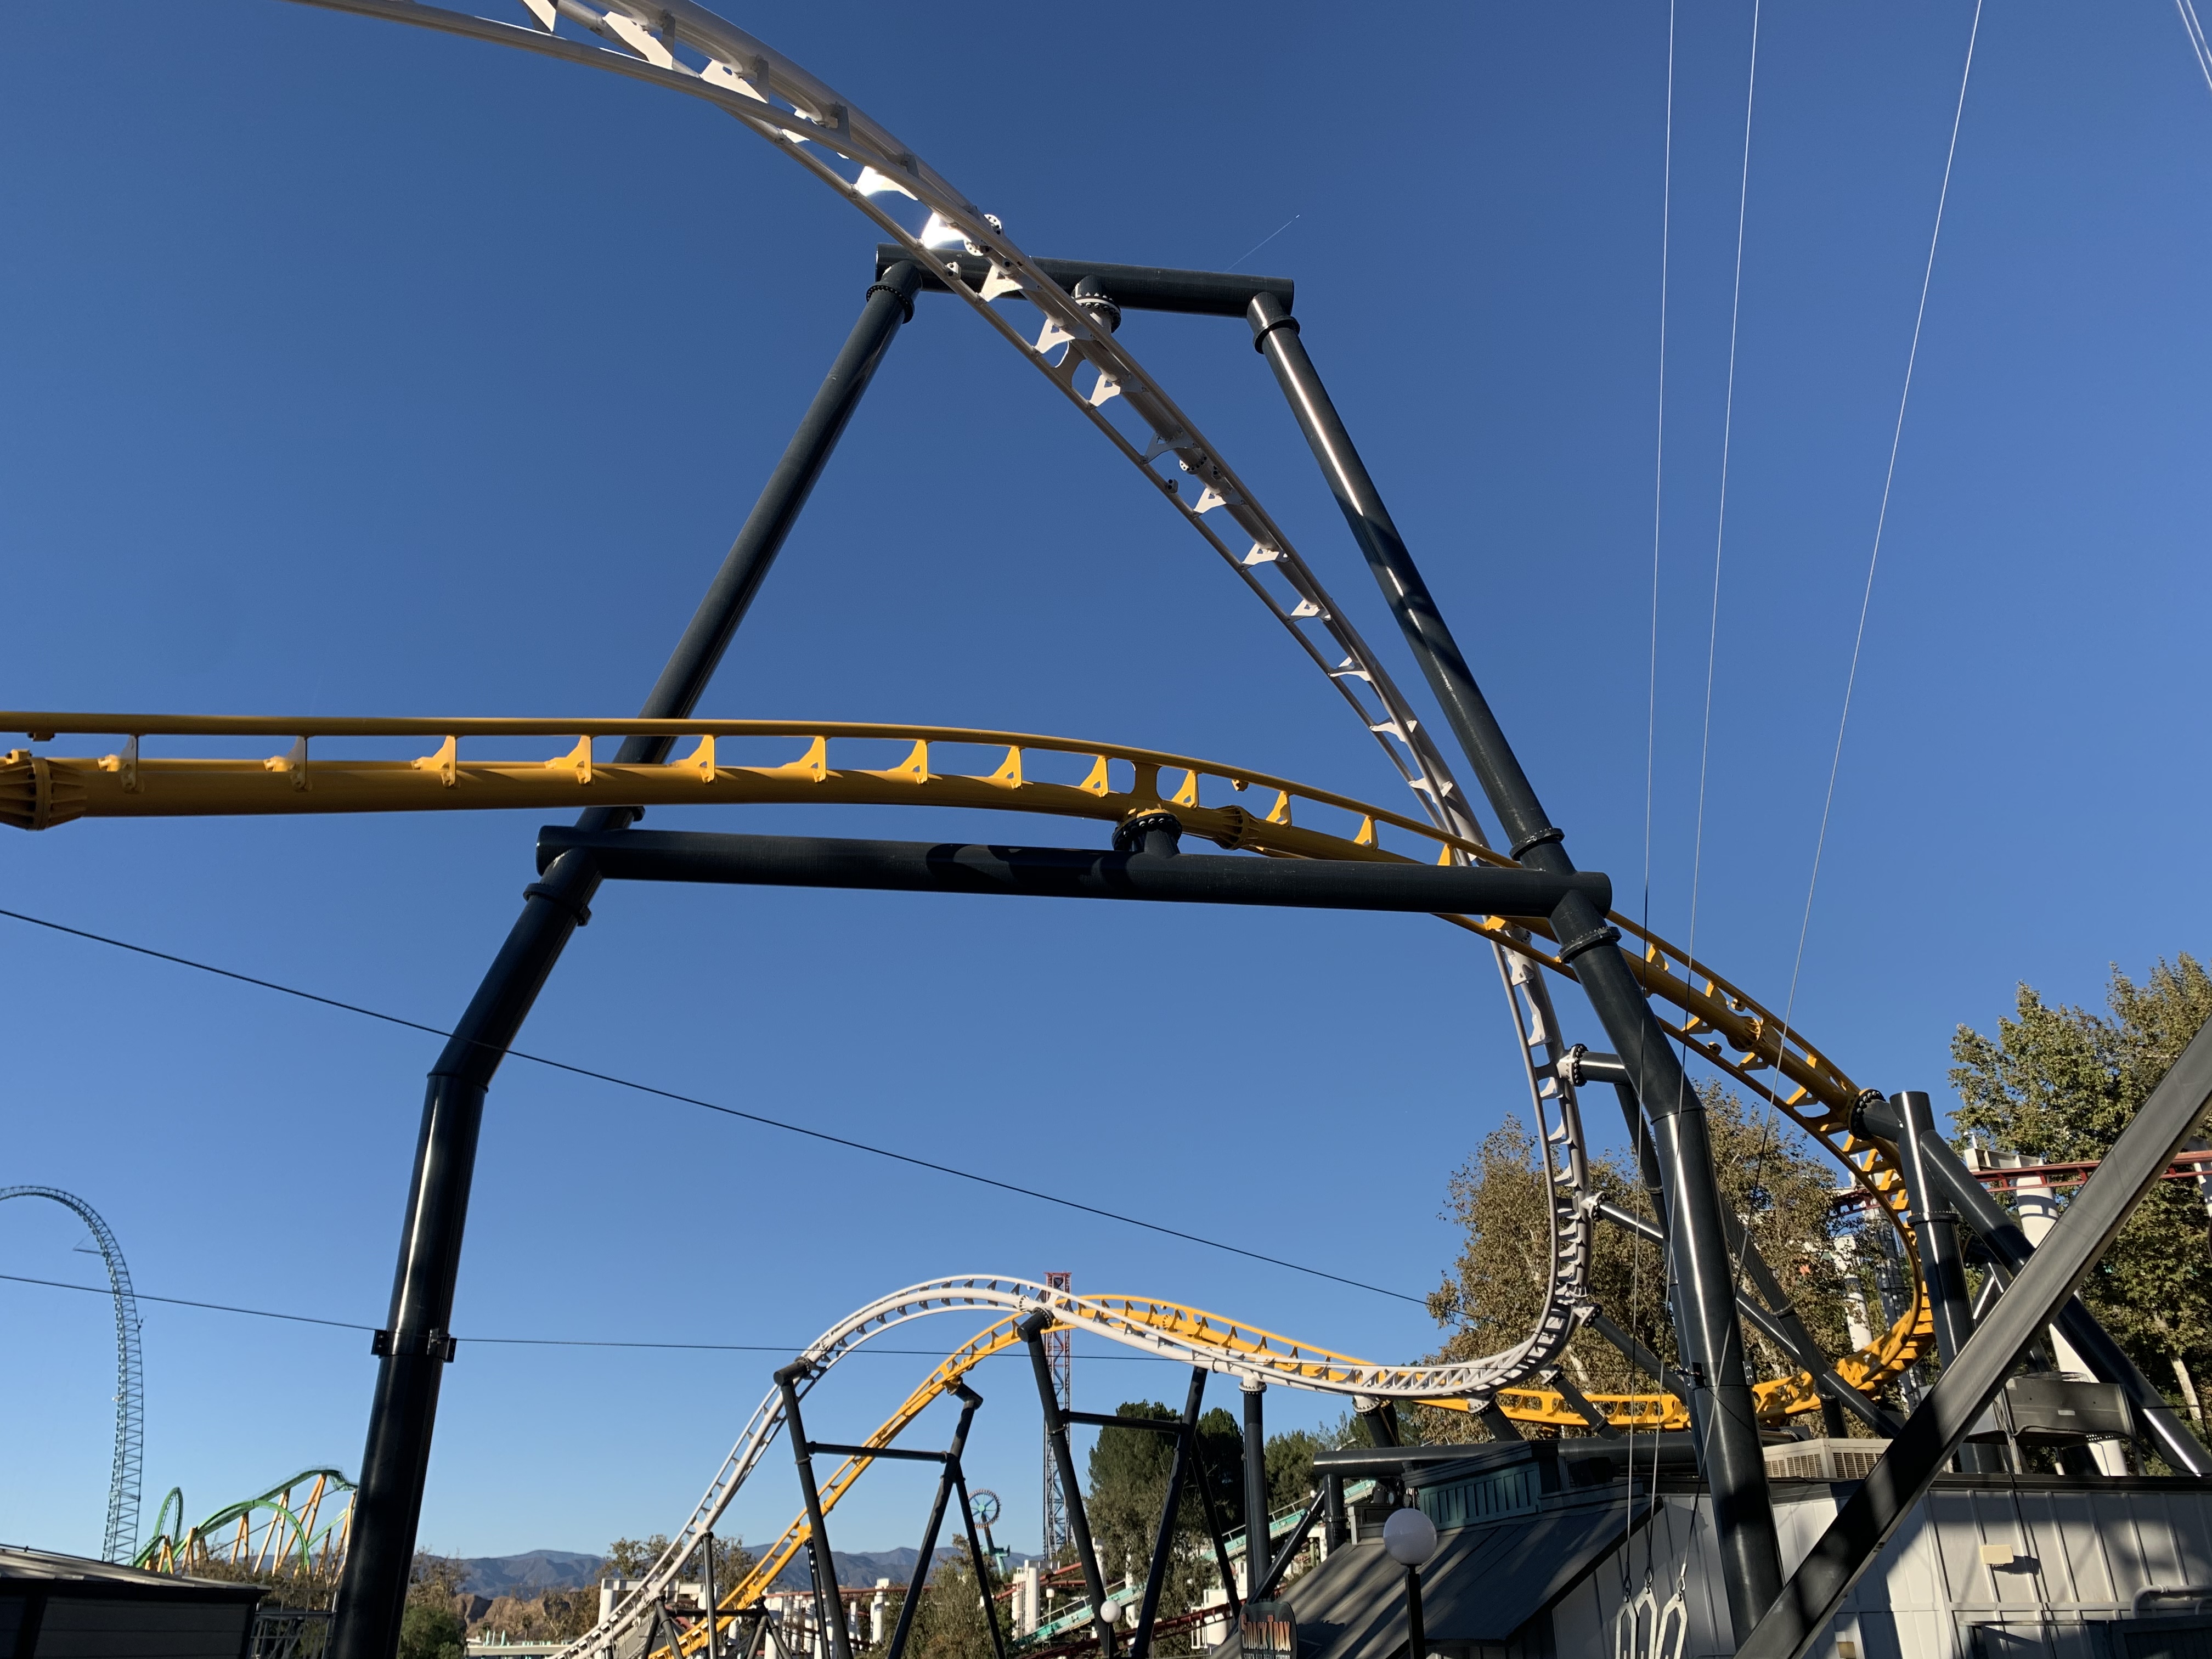 Six Flags Kicks Off Its 2019 Announcements With West Coast Racers